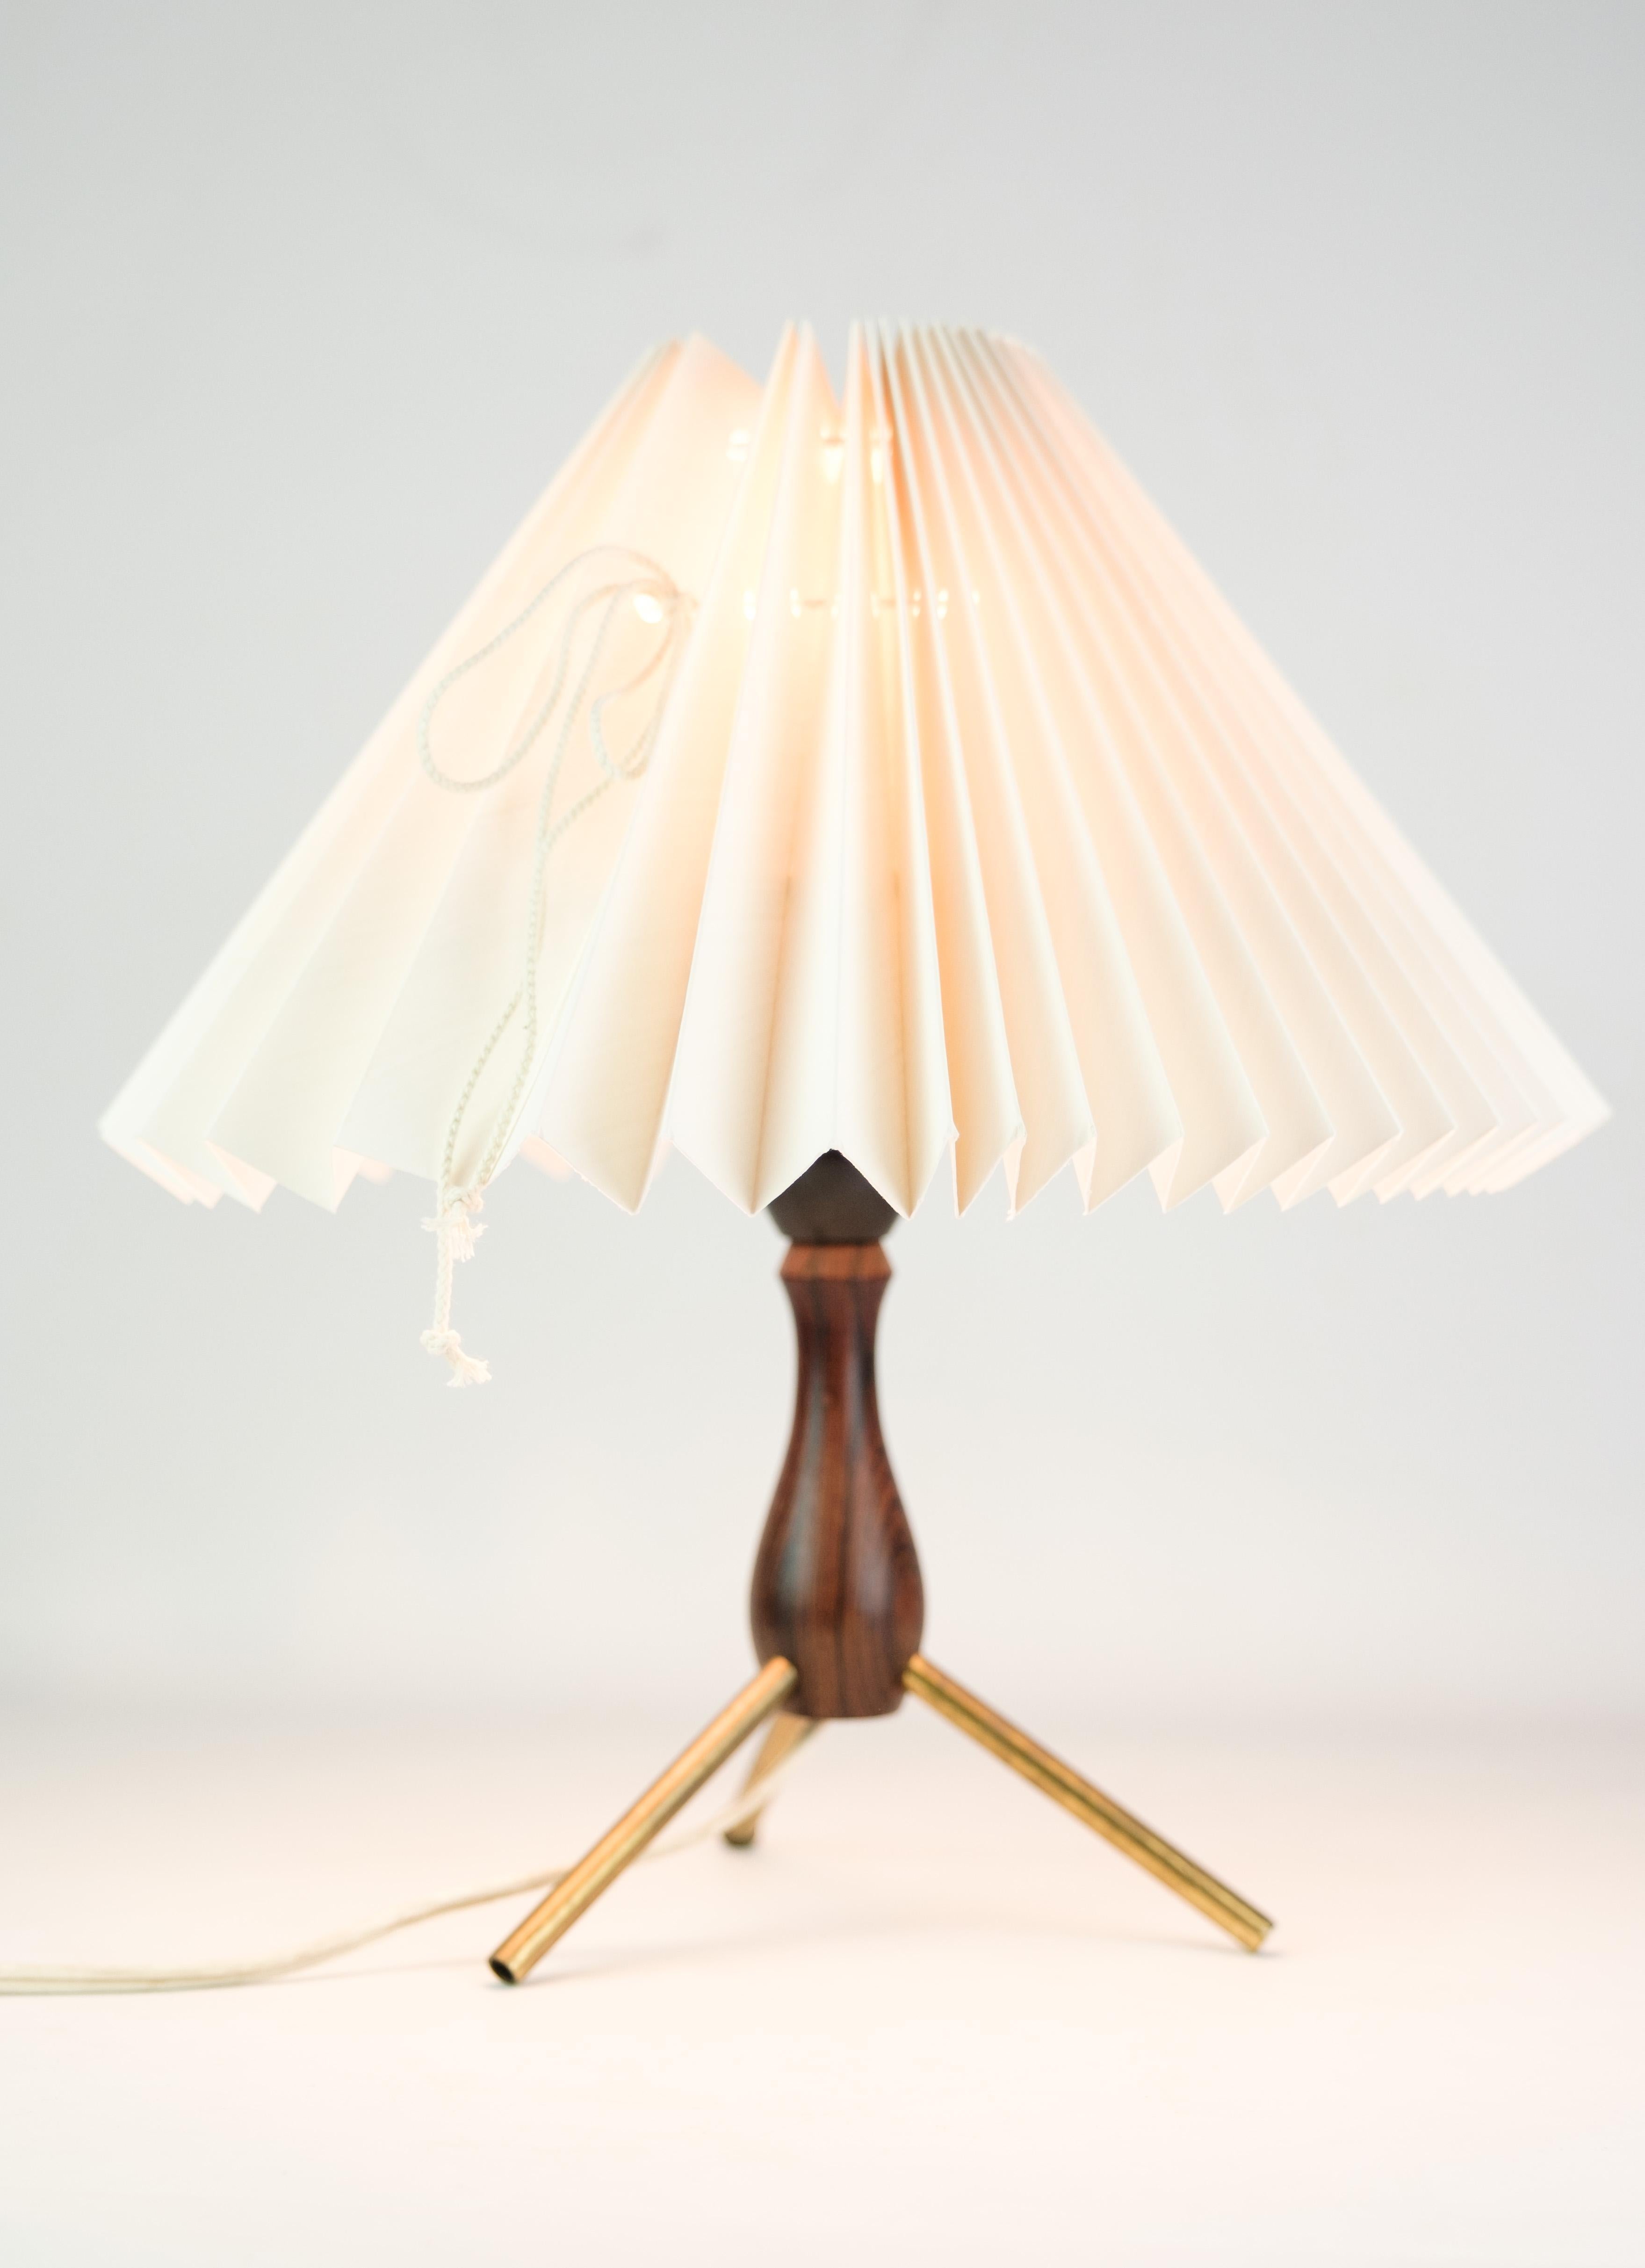 Three-legged table lamp in rosewood of Danish design with brass legs from around the 1960s. Lamp has an incredibly beautiful lampshade. Overall a lamp of very high quality
Dimensions in cm: H:31 W:15
This product will be inspected thoroughly at